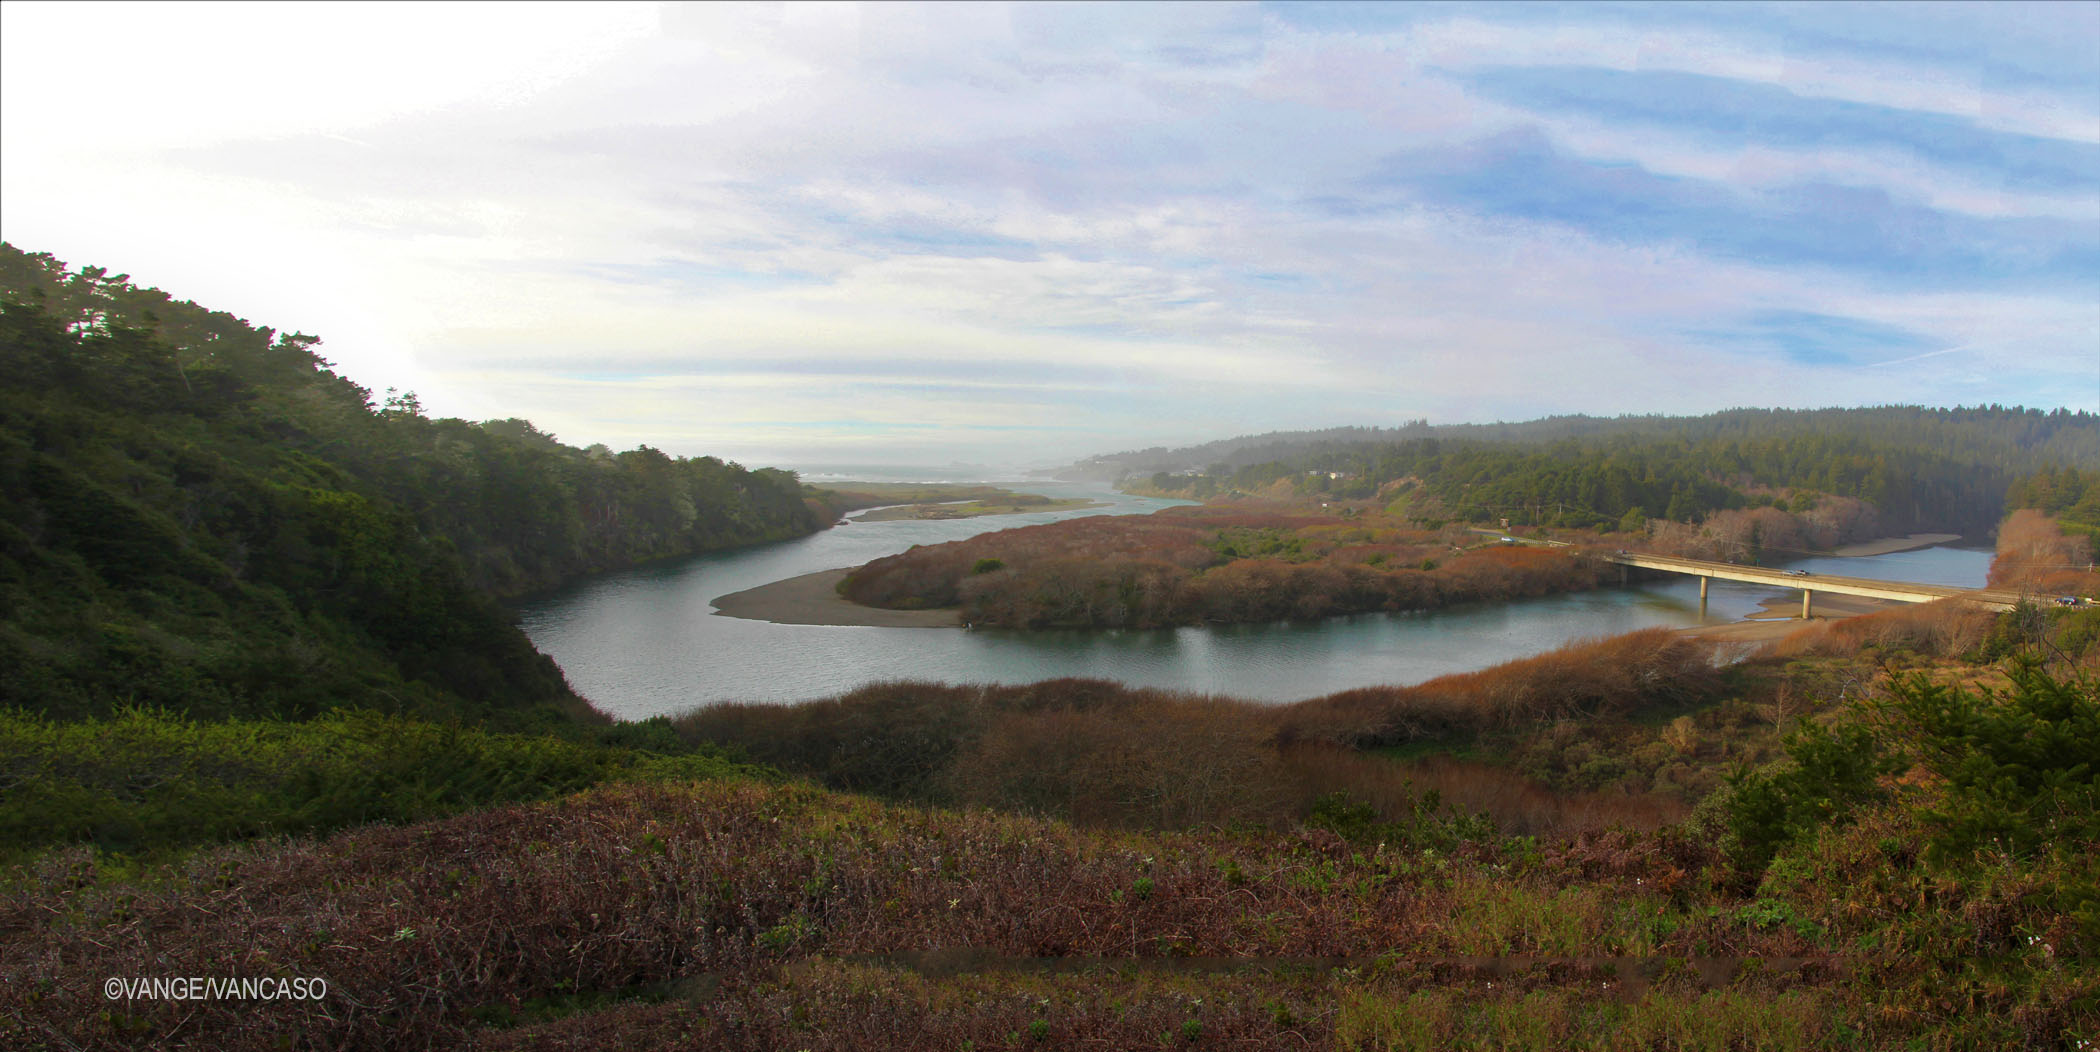 The Russian River at Jenner, CA, USA